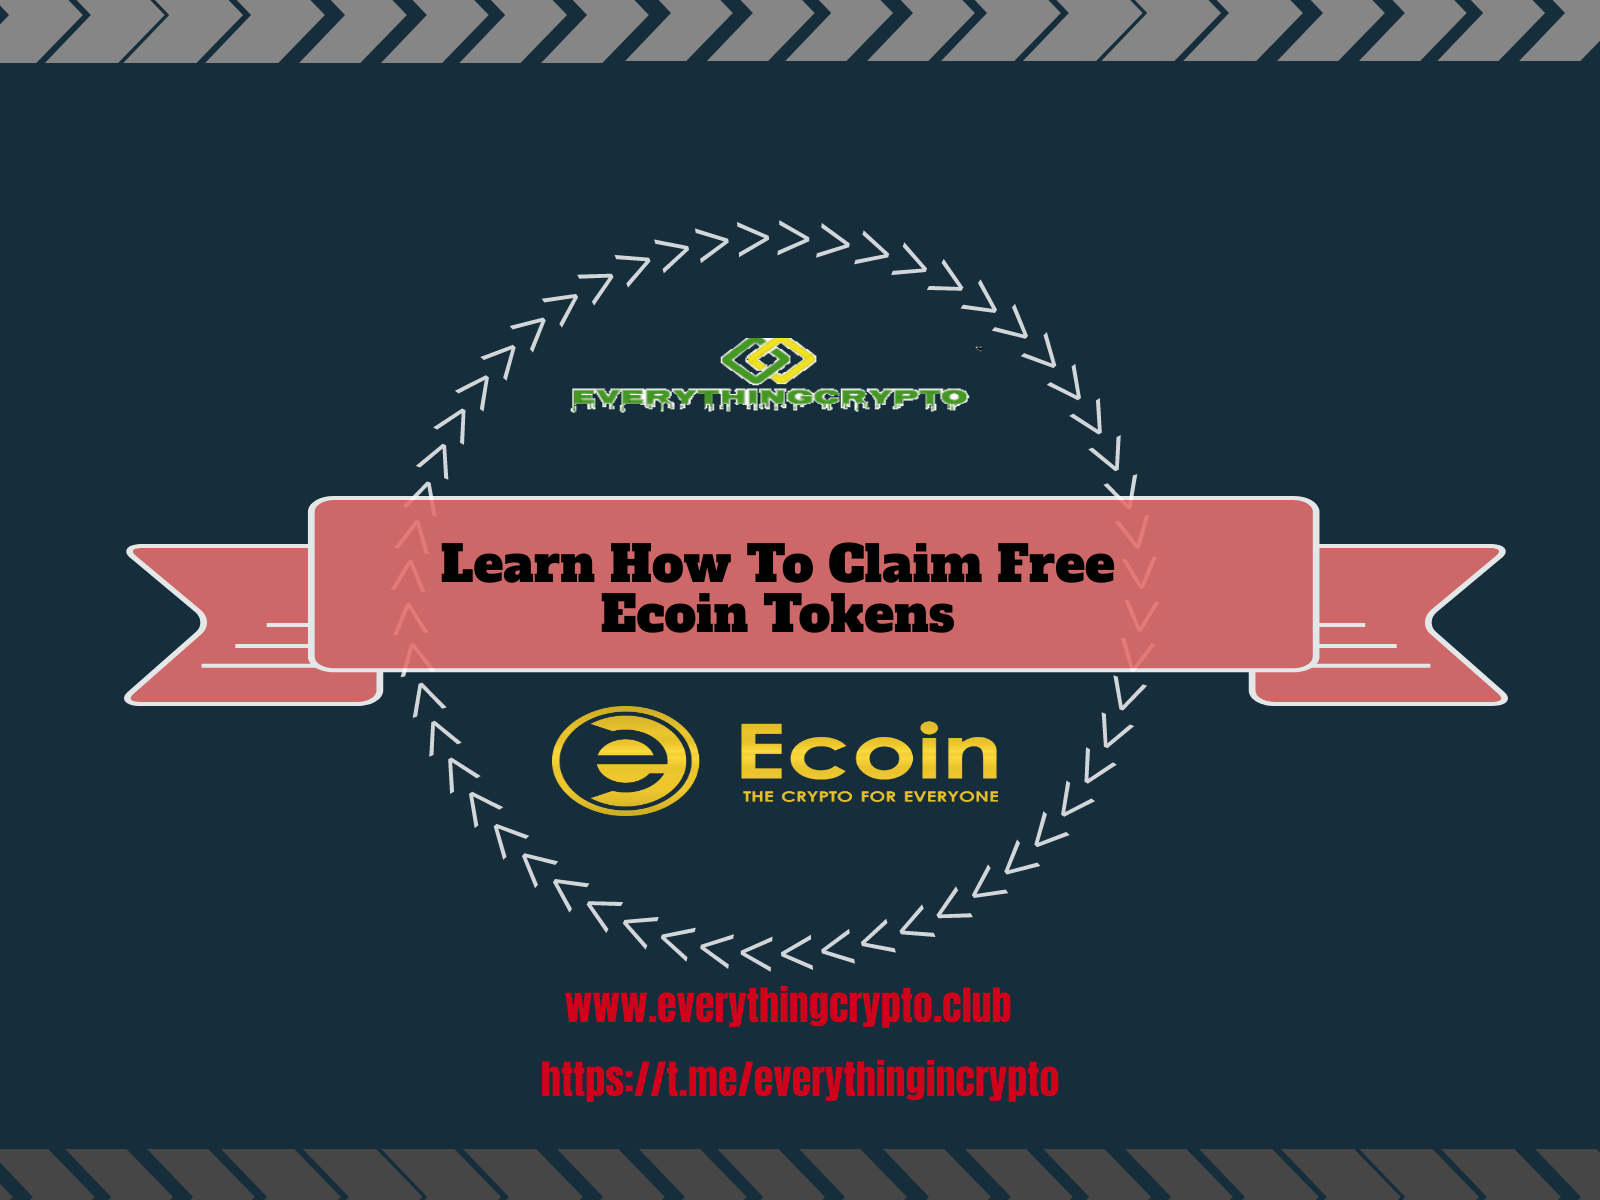 Upcoming Airdrops Learn How To Claim Free Ecoin Tokens?